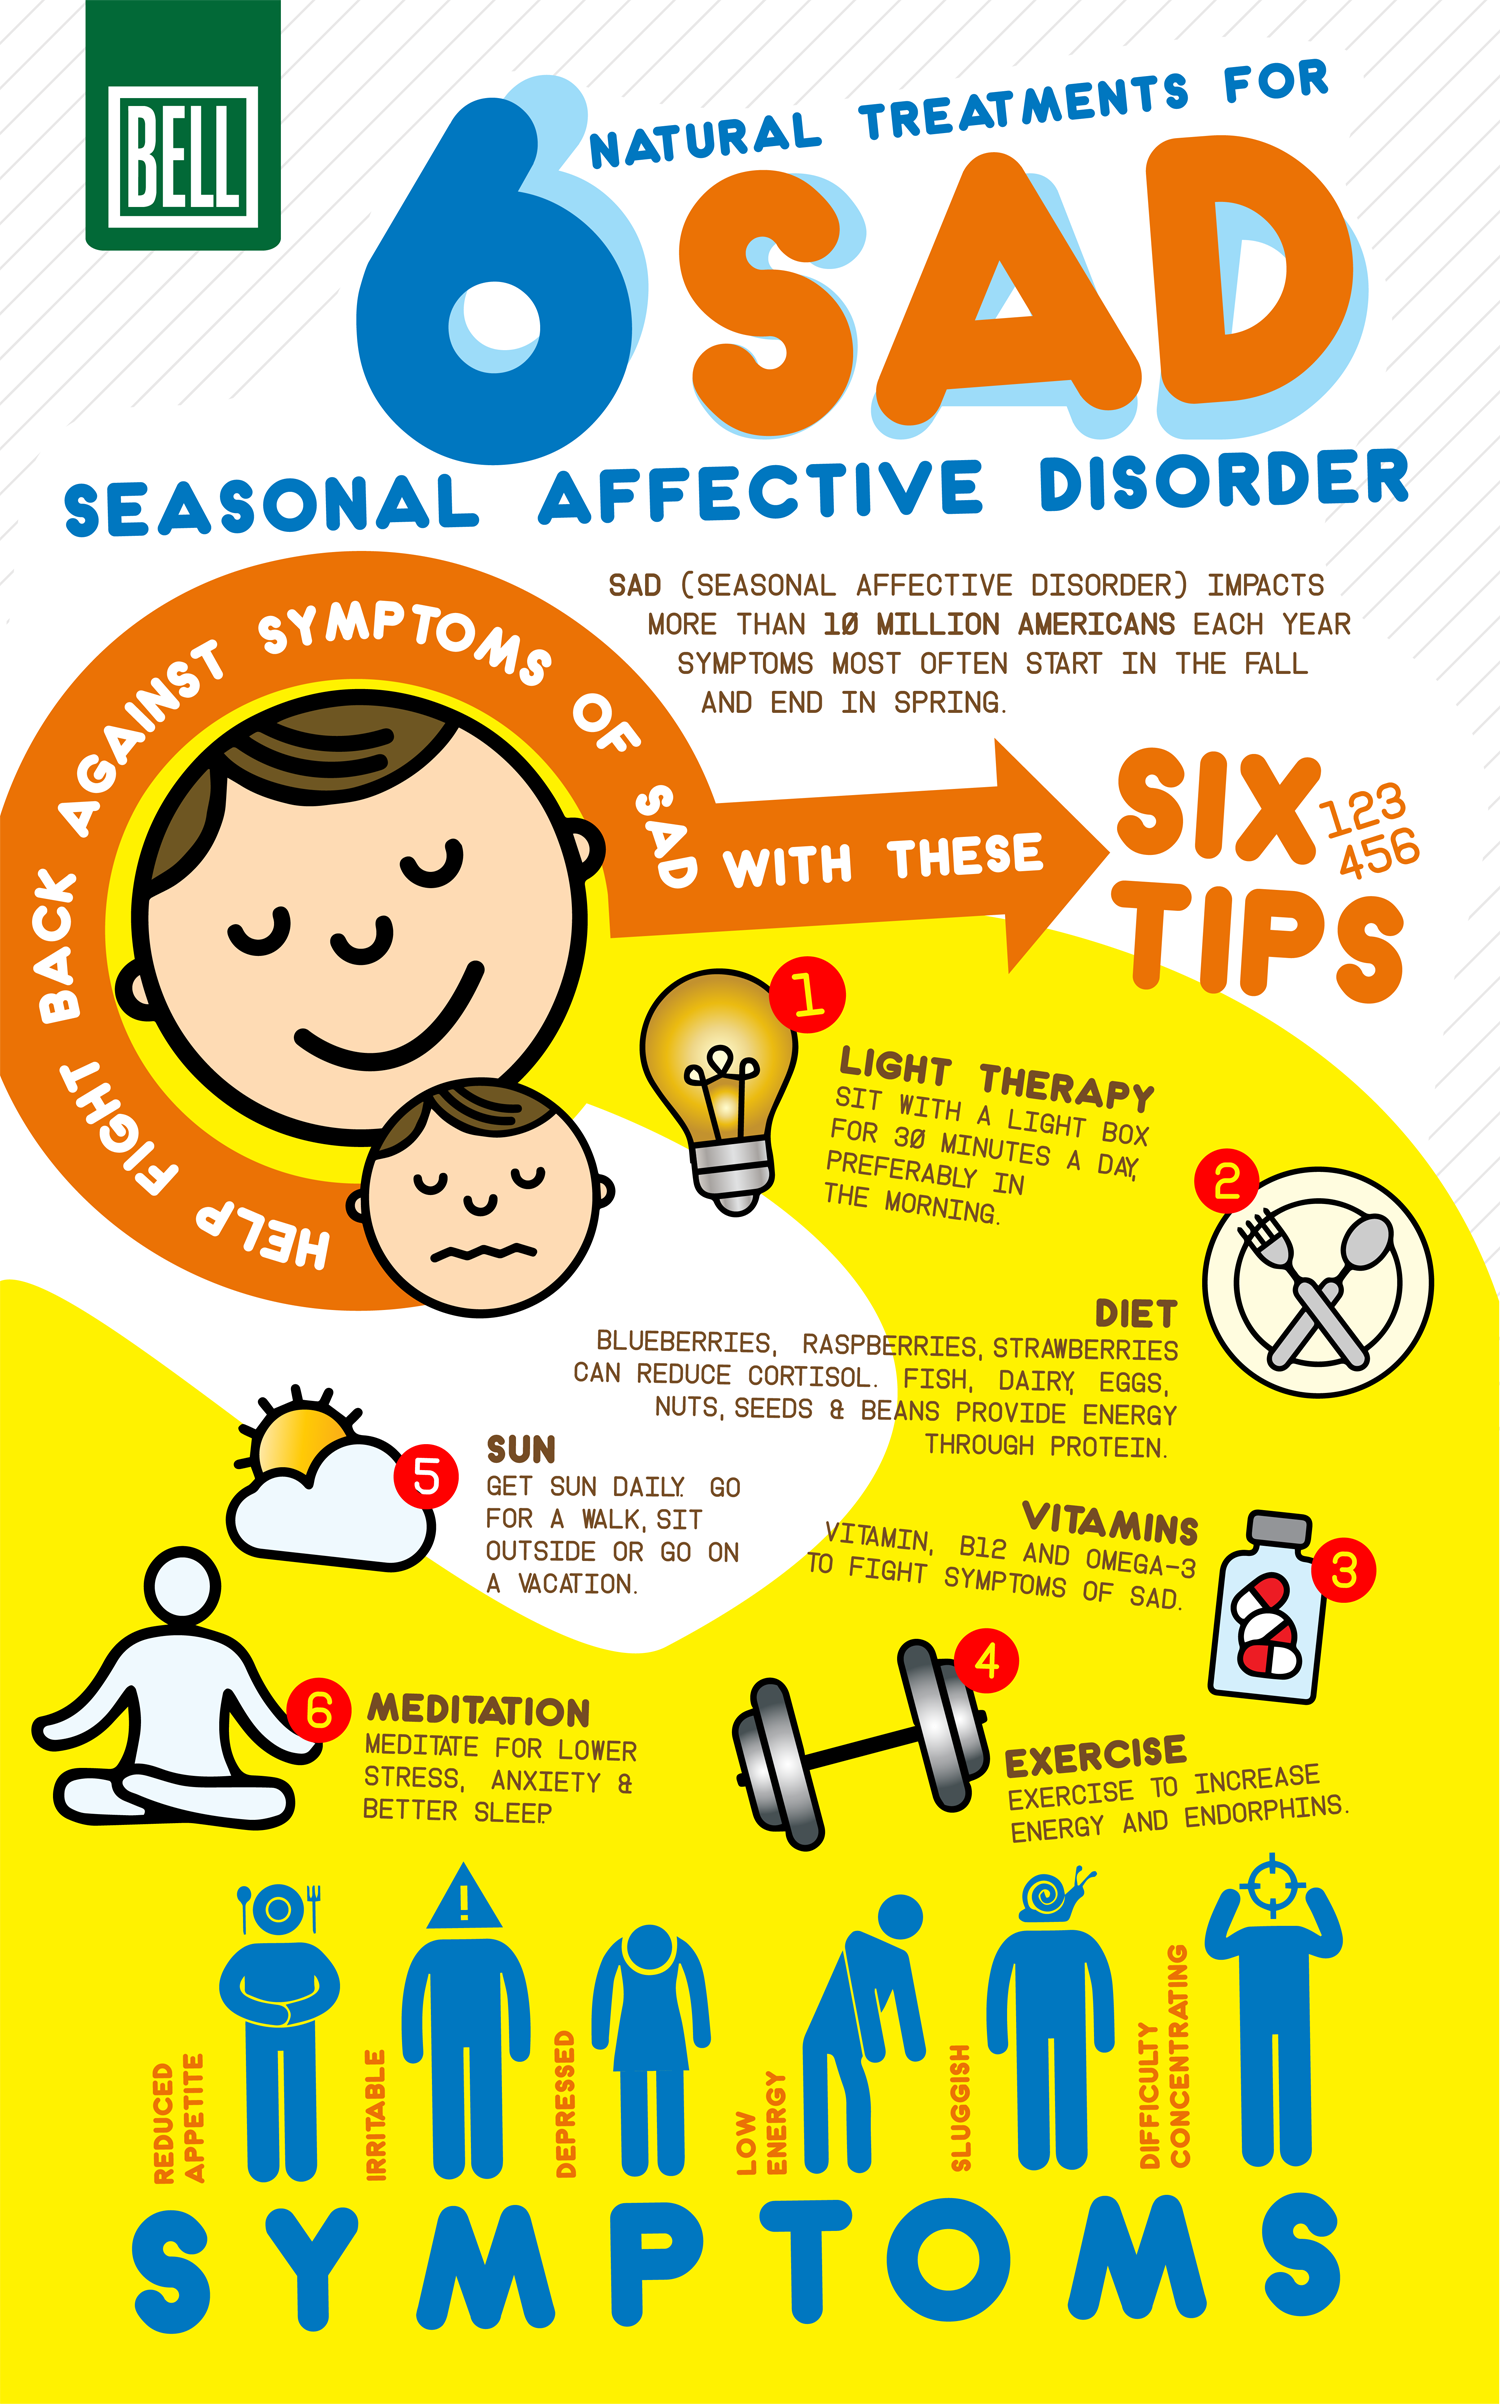 6 Natural Treatments for Seasonal Affective Disorder ...